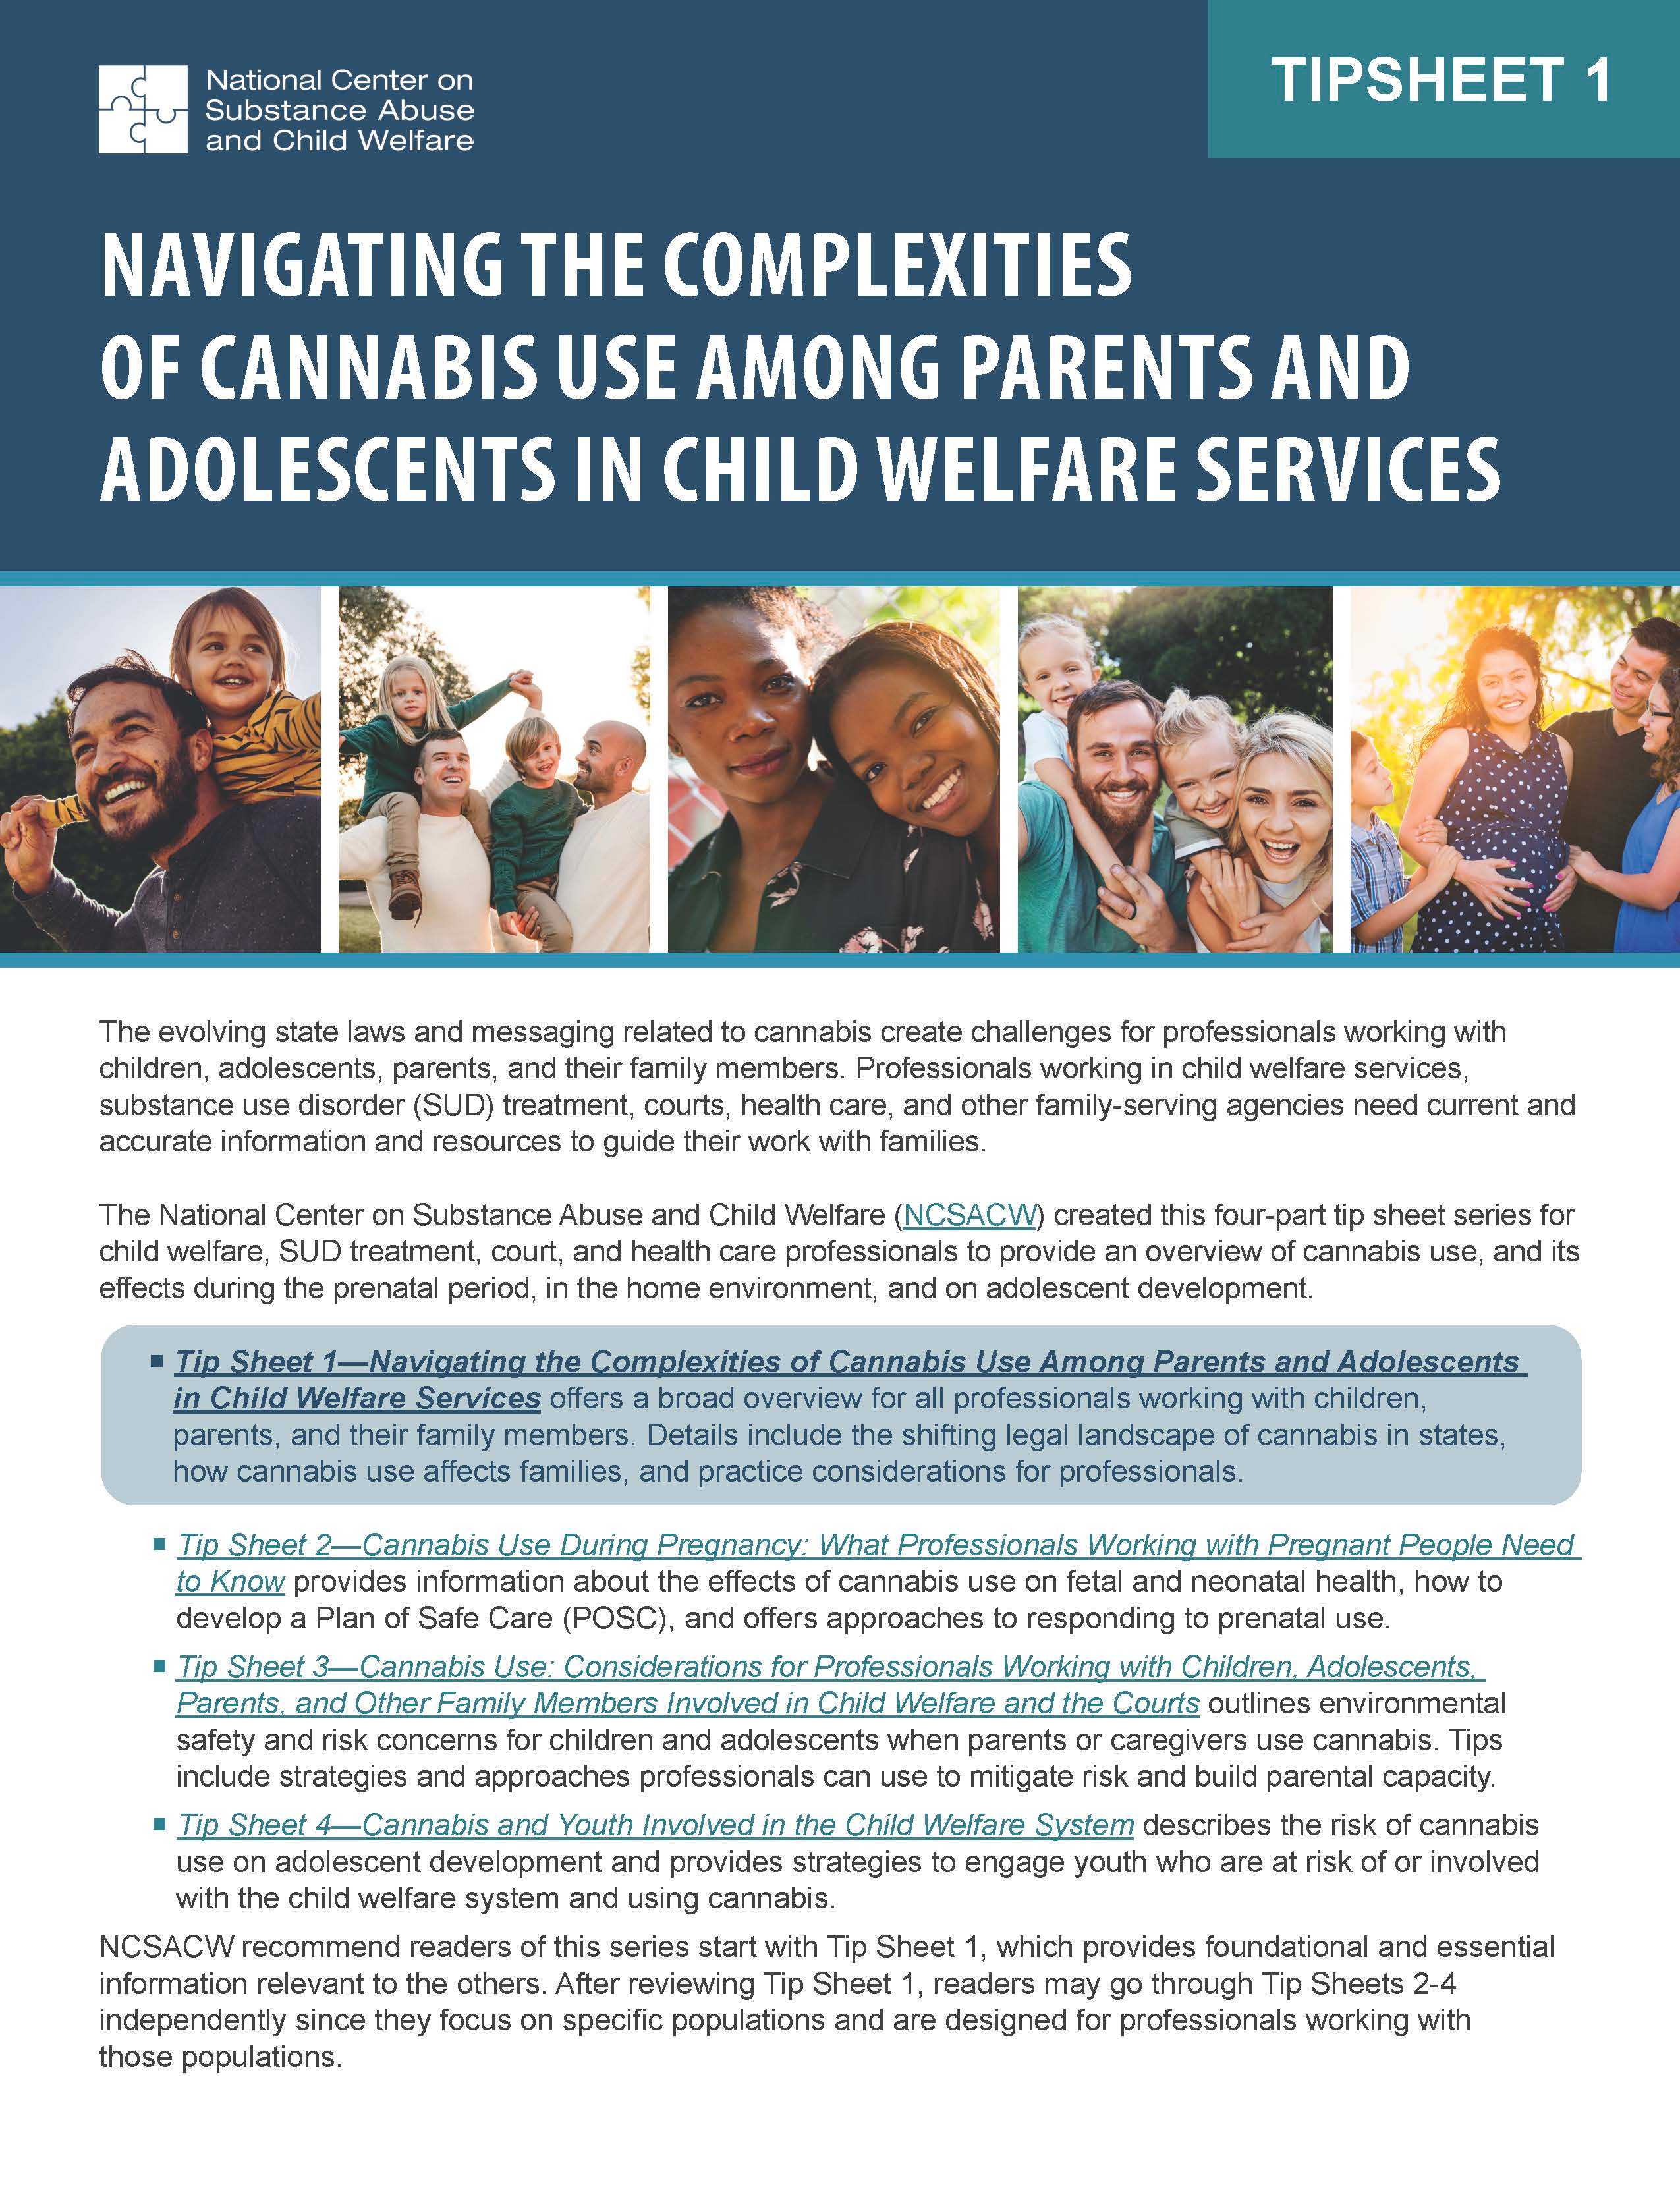 Tip Sheet 1: Navigating the Complexities of Cannabis Use Among Parents and Adolescents in Child Welfare Services